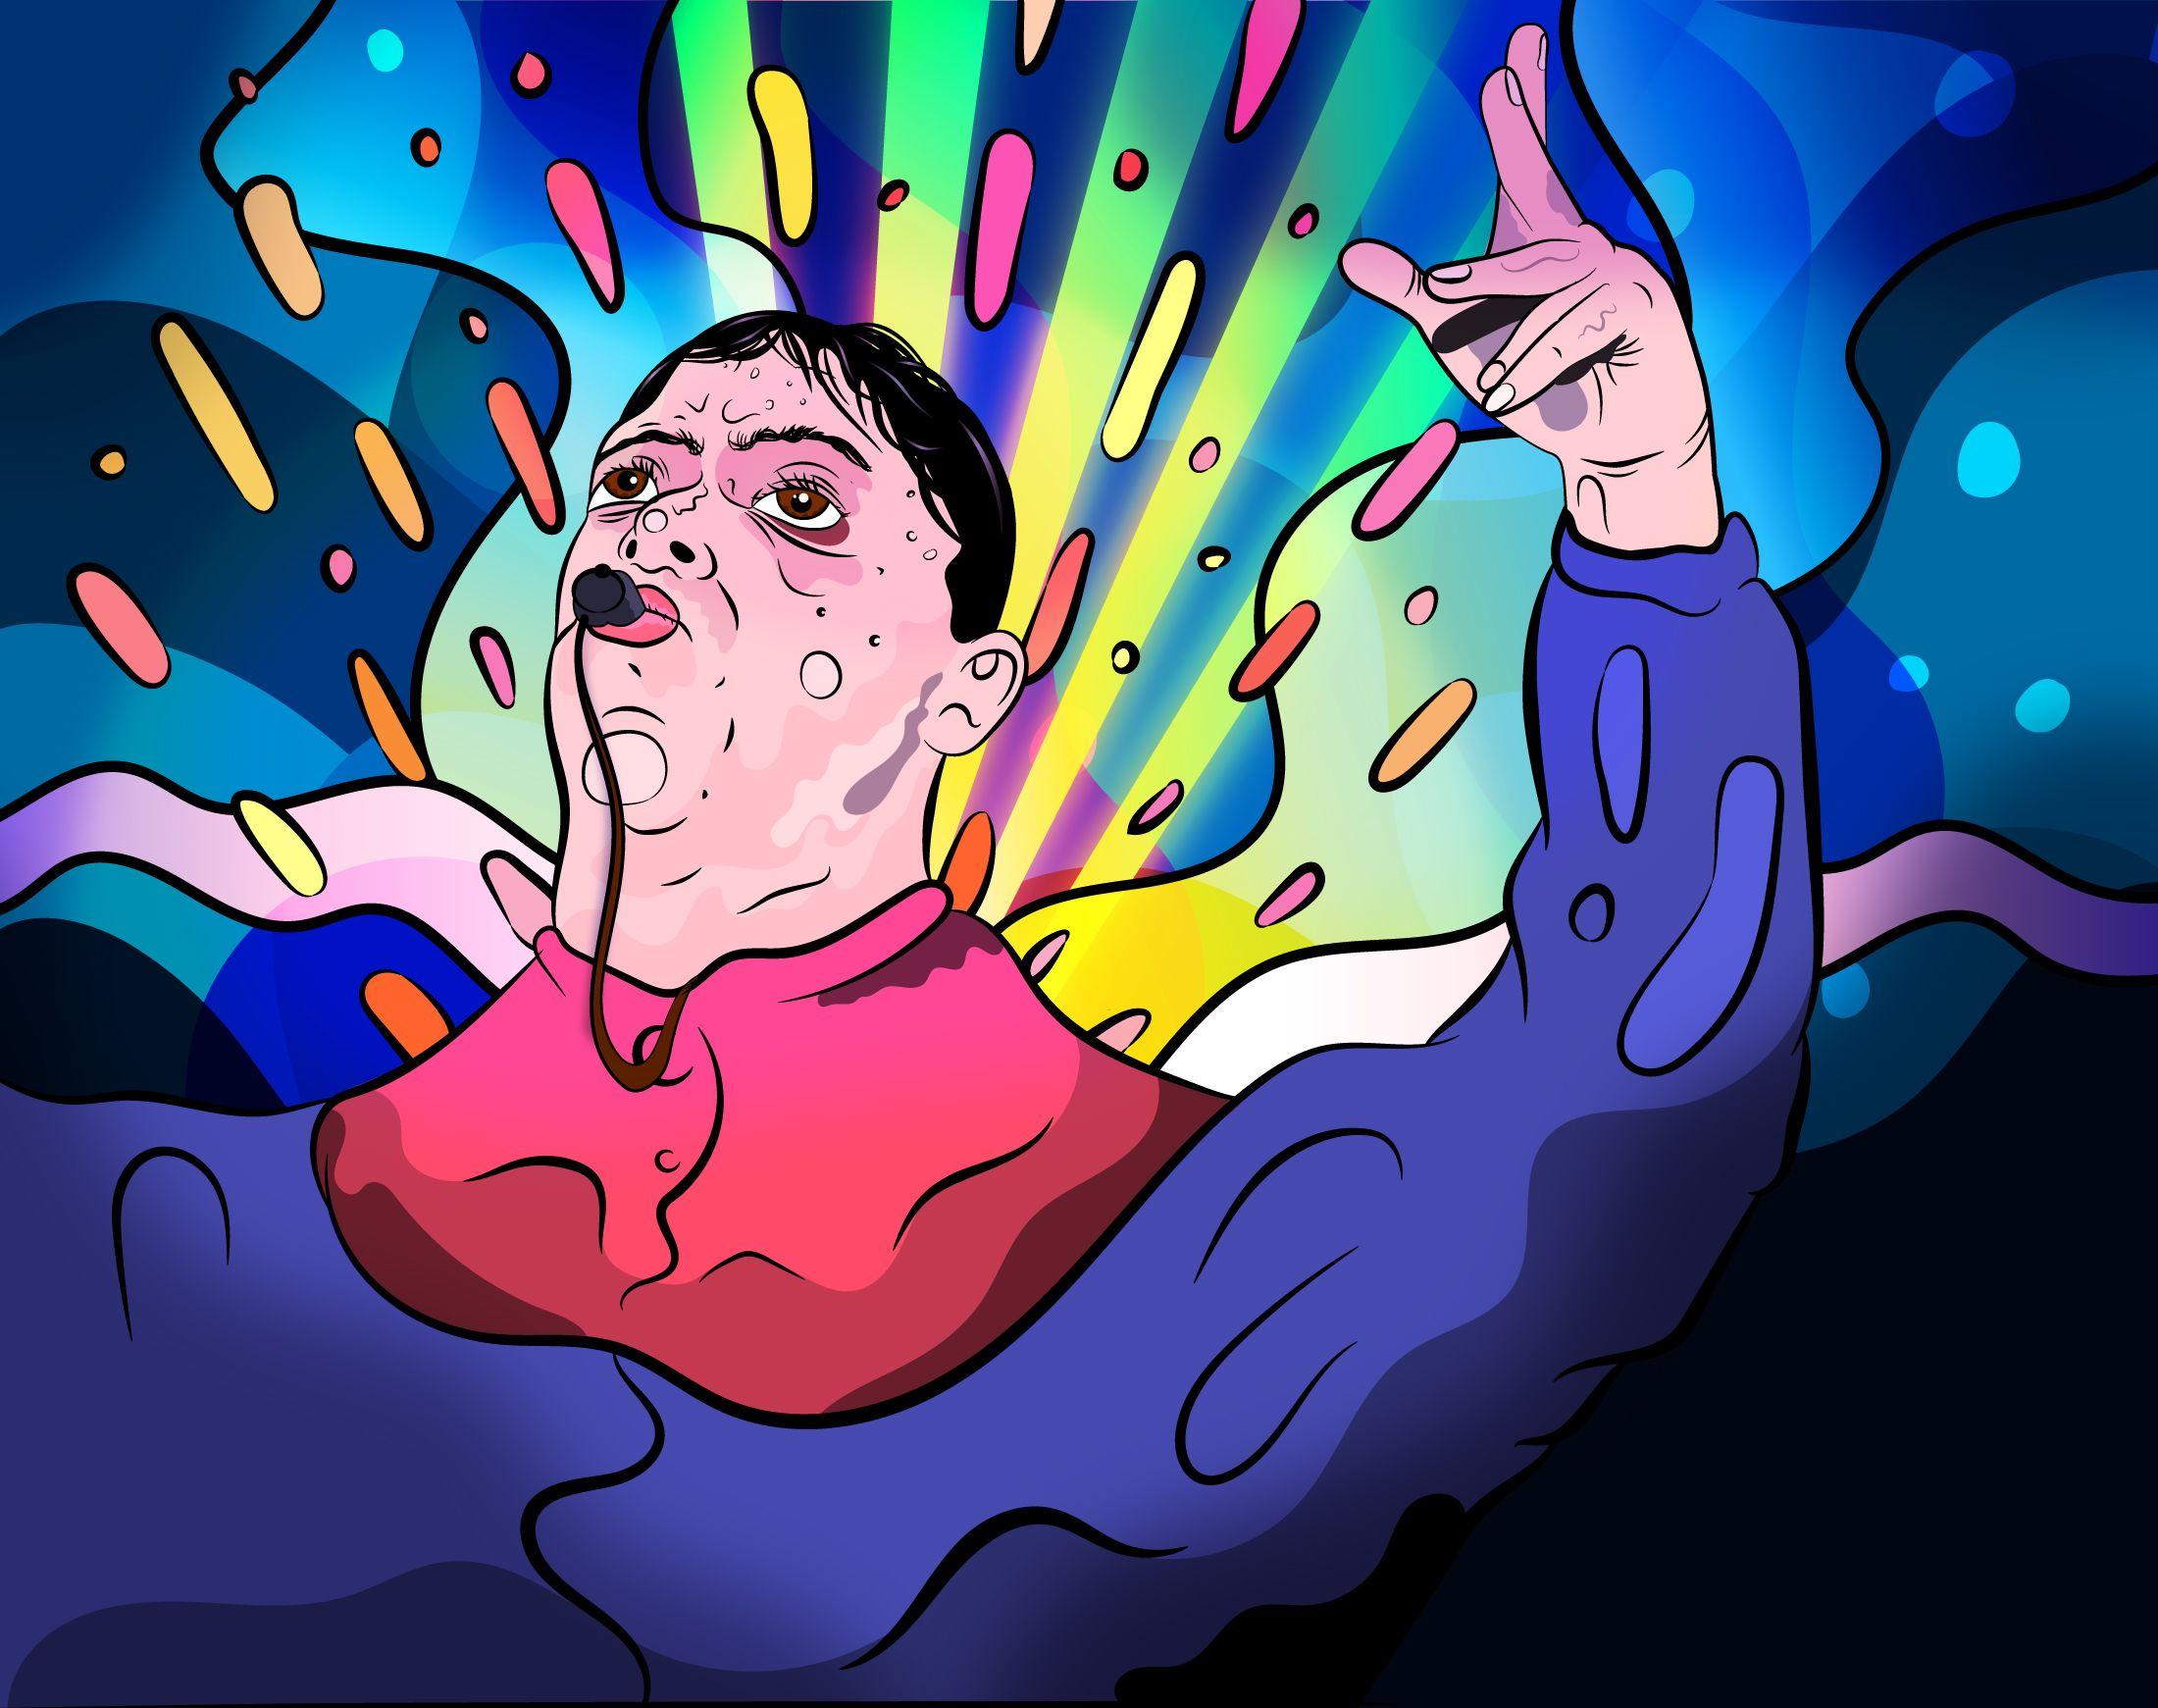 Digital art illustration of a young man in a nightclub, wearing a shell suit and blowing a whistle to the music. The illustration uses bold vector graphics and vibrant colours to depict the light show of a nightclub. 